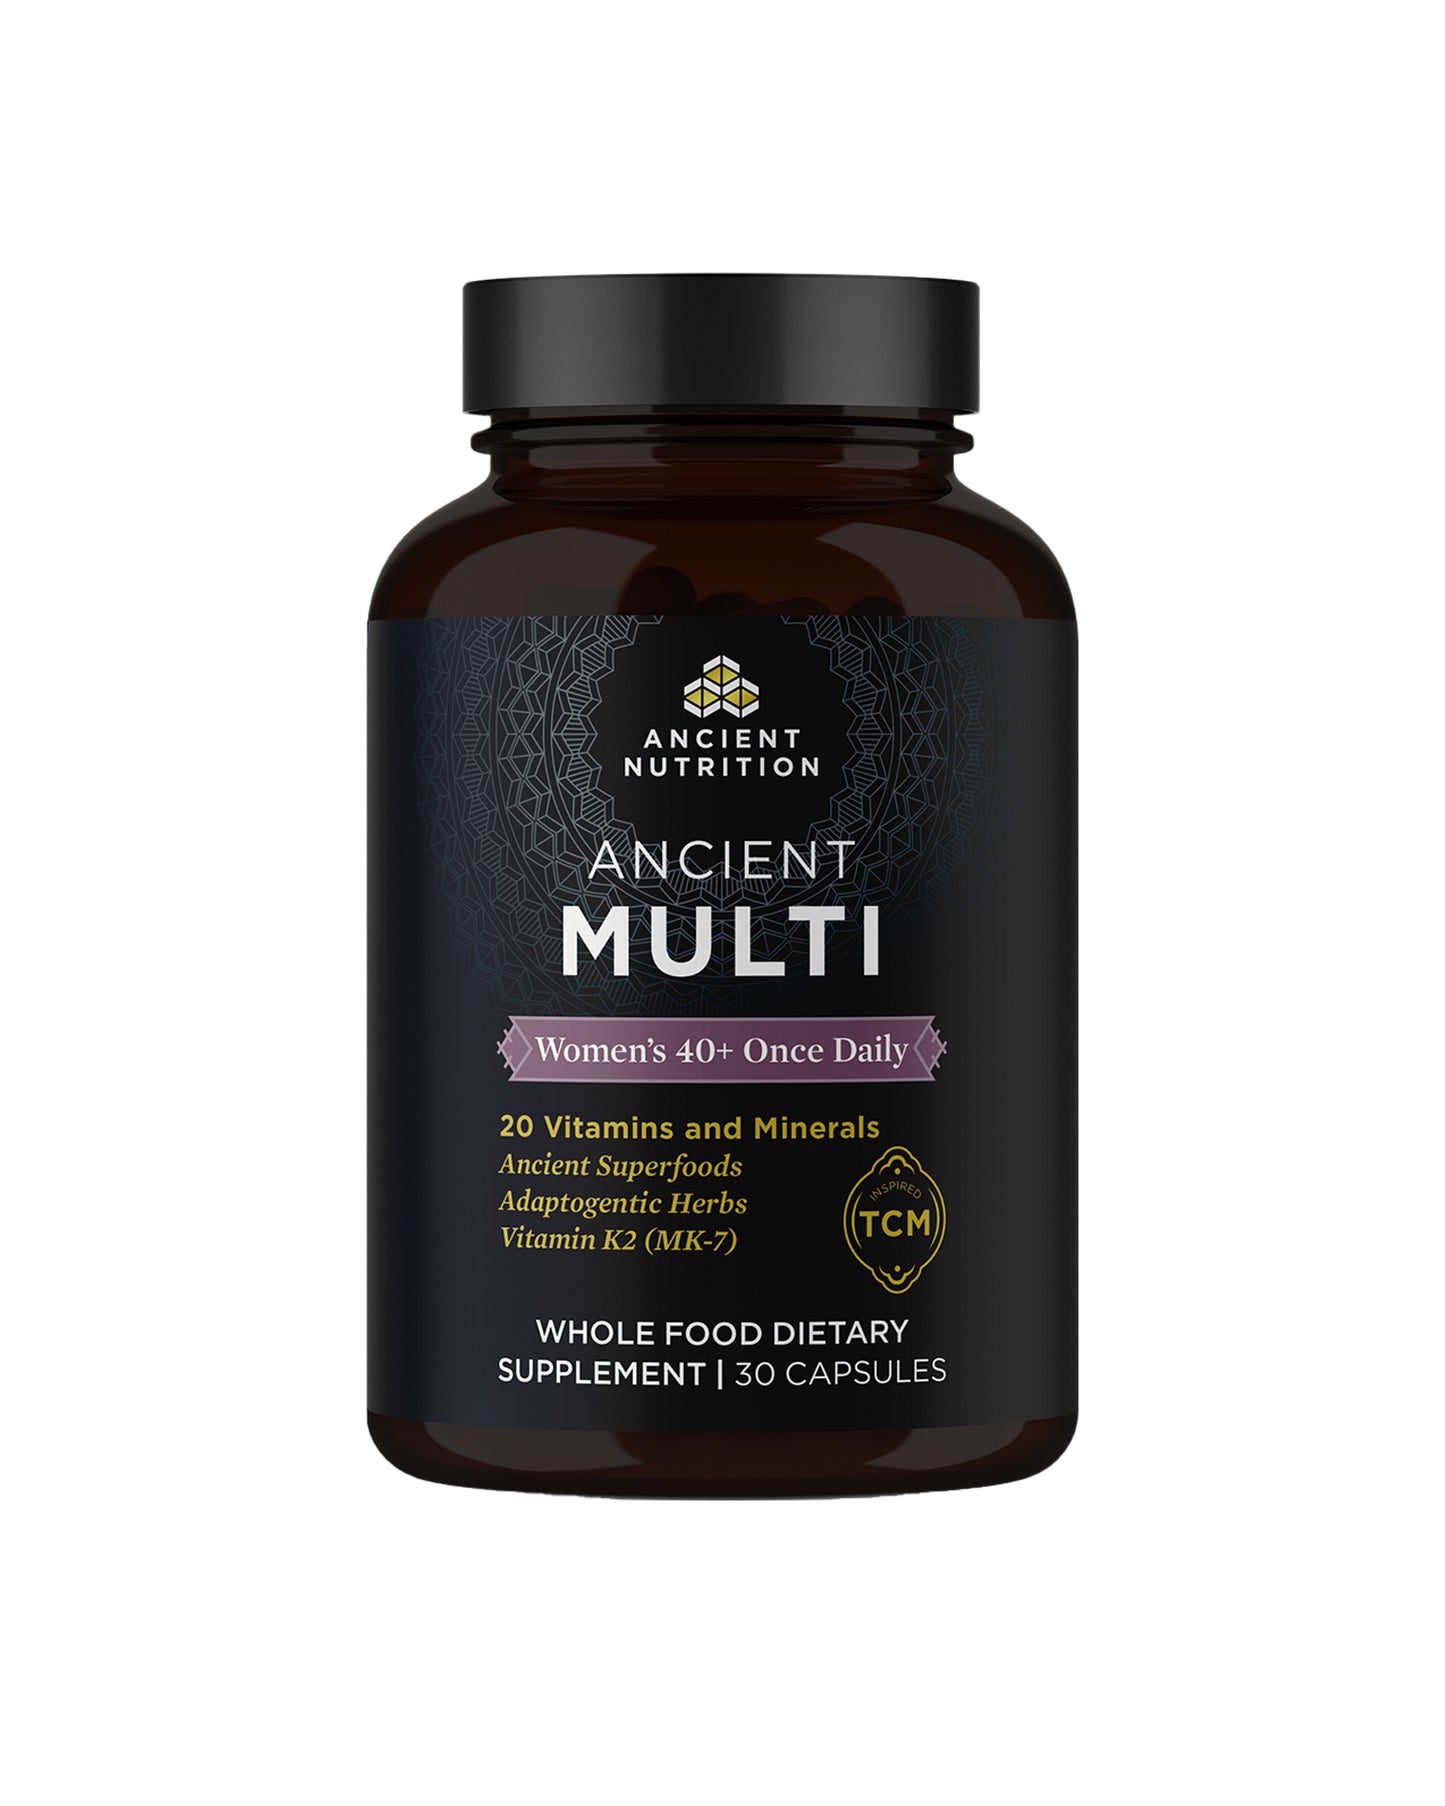 Women's 40+ Once Daily Multivitamin Capsules